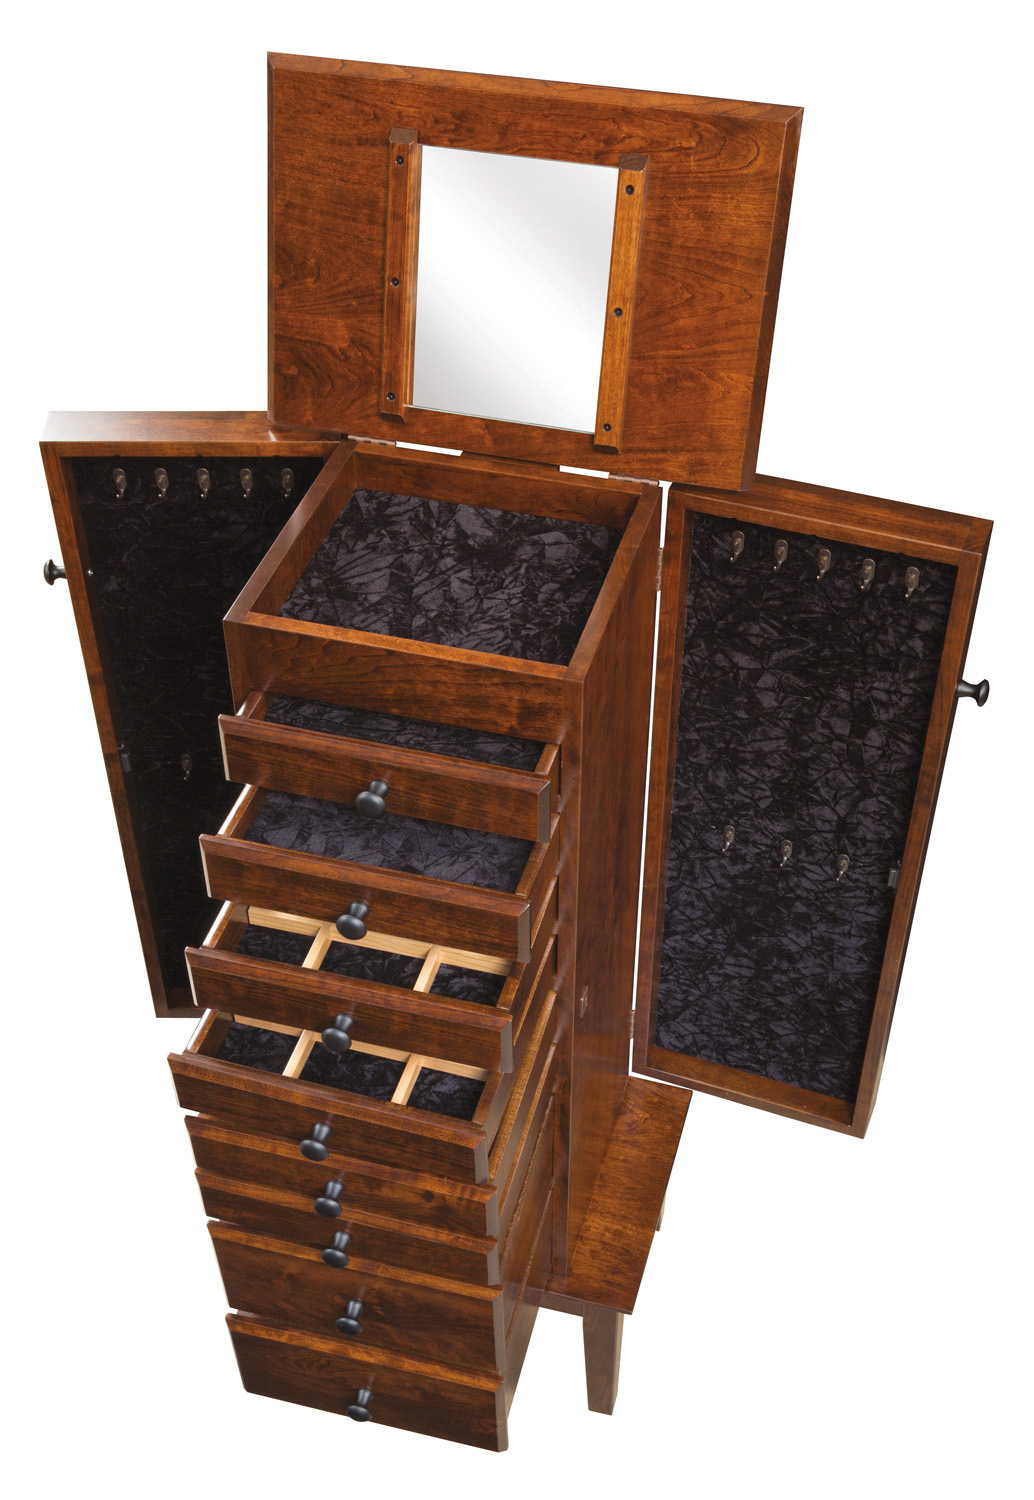 amish-shaker-jewelry-armoire